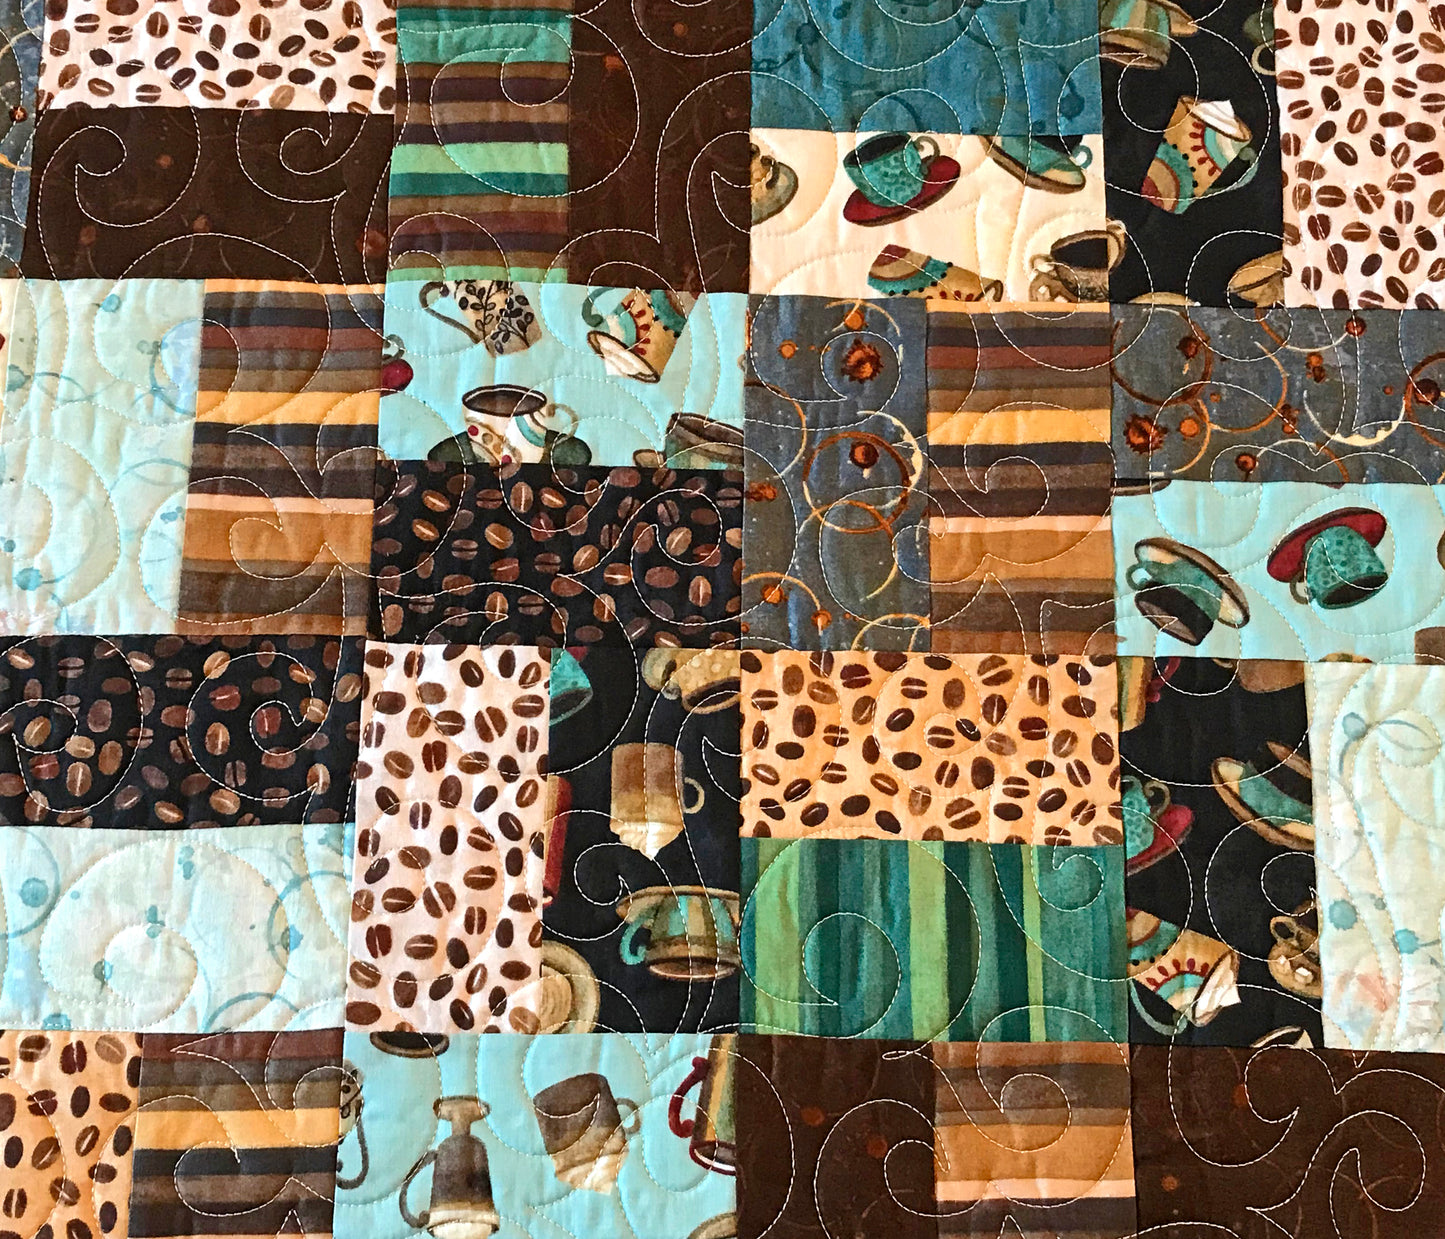 Teal and Brown Coffee Themed Table Runner - Handmade Quilts, Digital Patterns, and Home Décor items online - Cuddle Cat Quiltworks